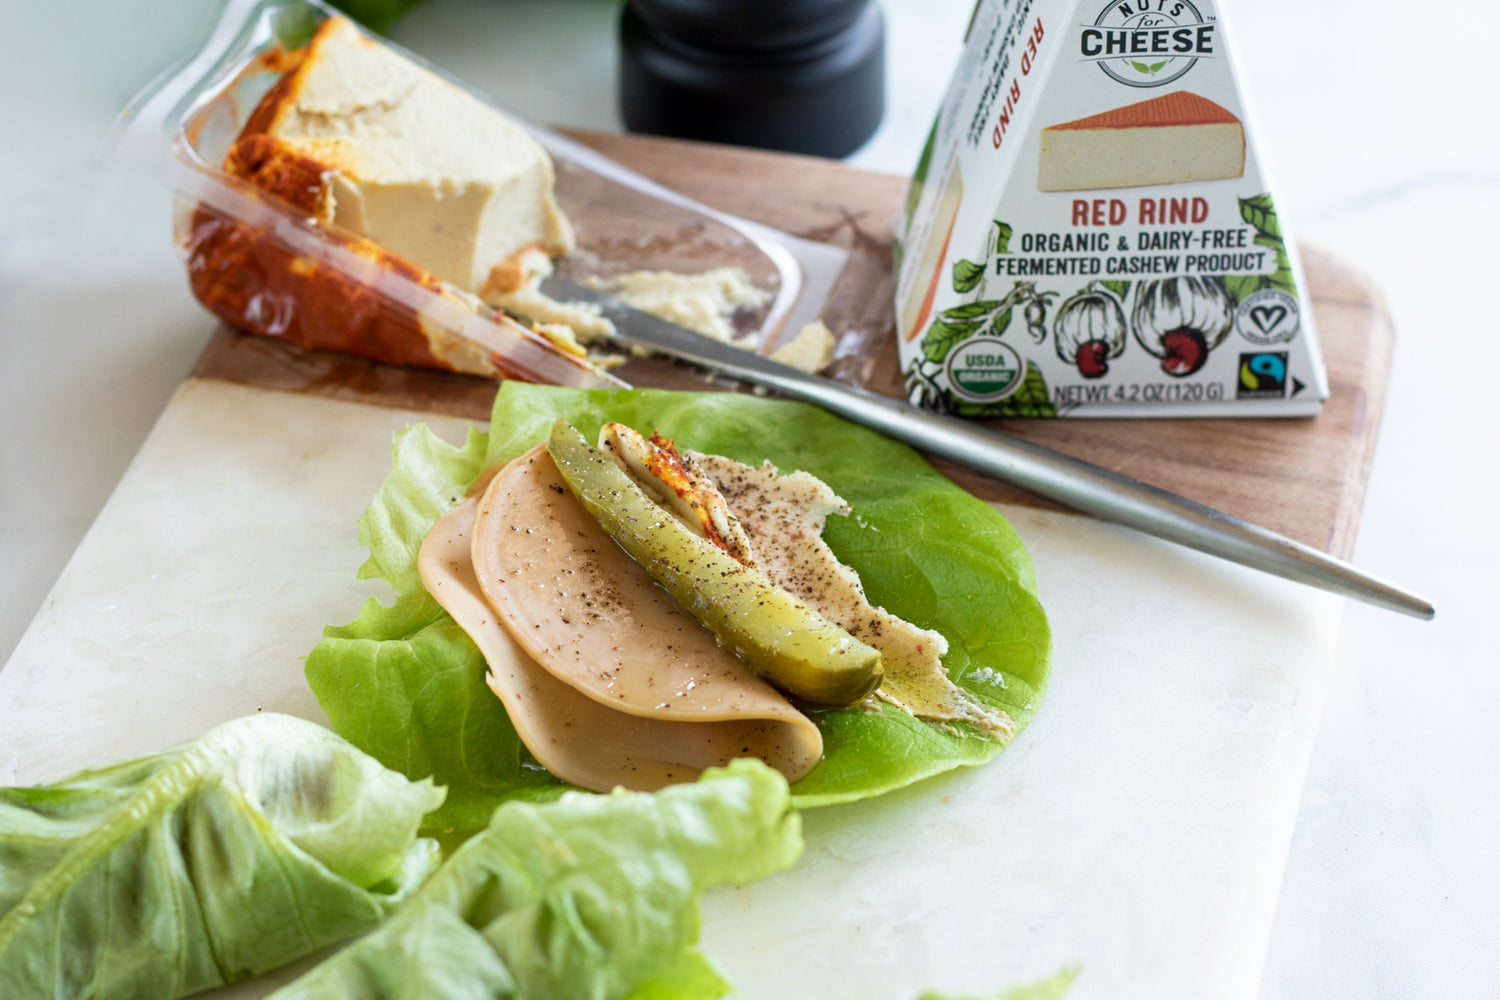 Lettuce wrap on a cutting board topped with vegan sliced turkey, dairy-free gouda cheese, and a pickle slice. Served next to a sliced wedge of dairy-free smoked gouda cheese.